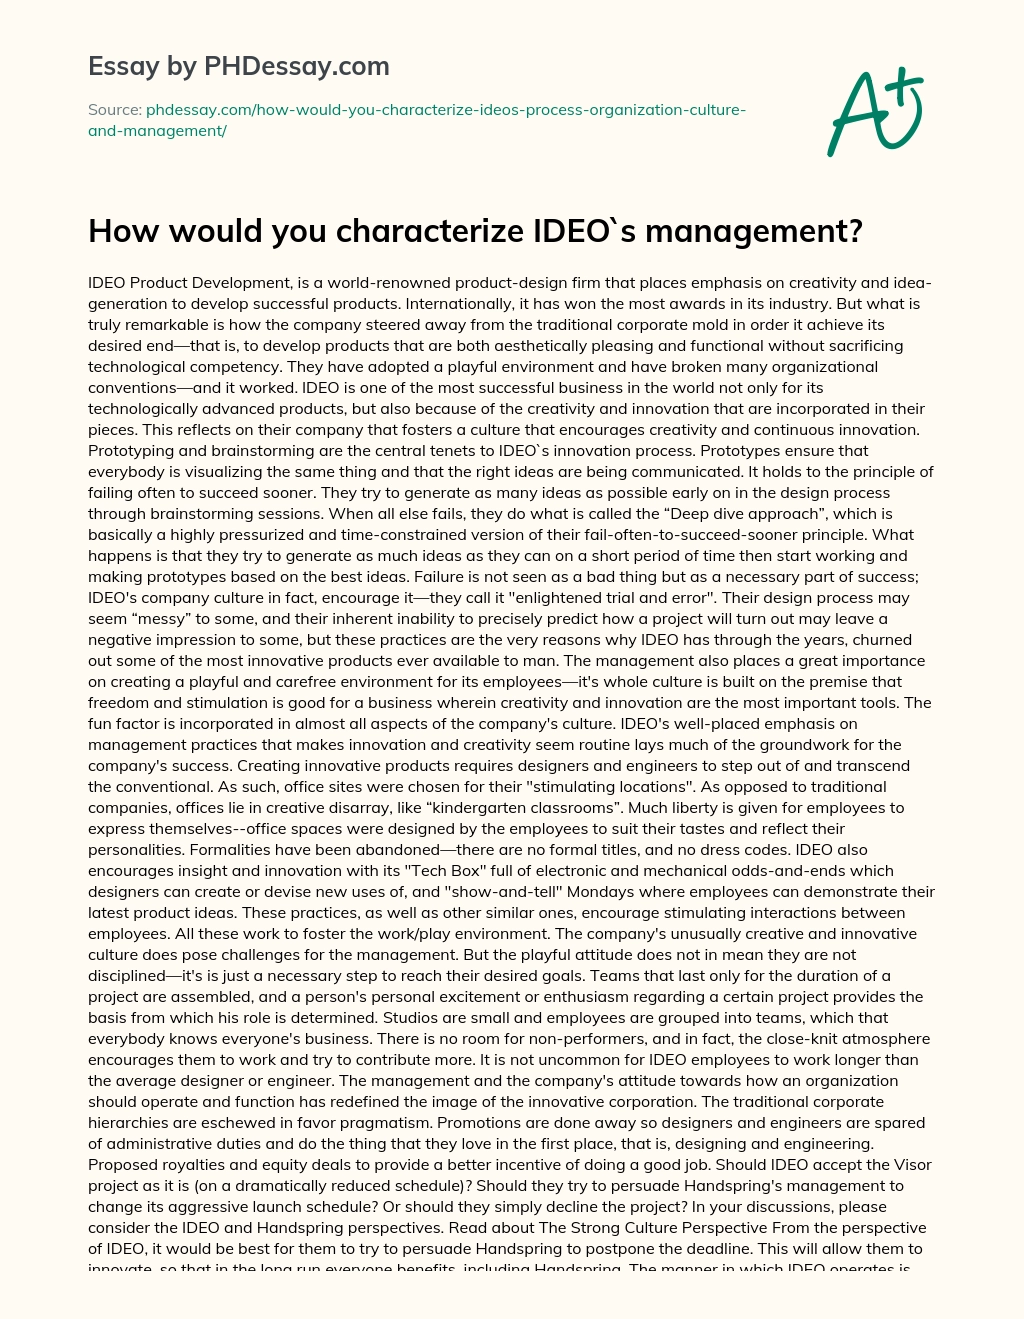 How would you characterize IDEO`s management? essay